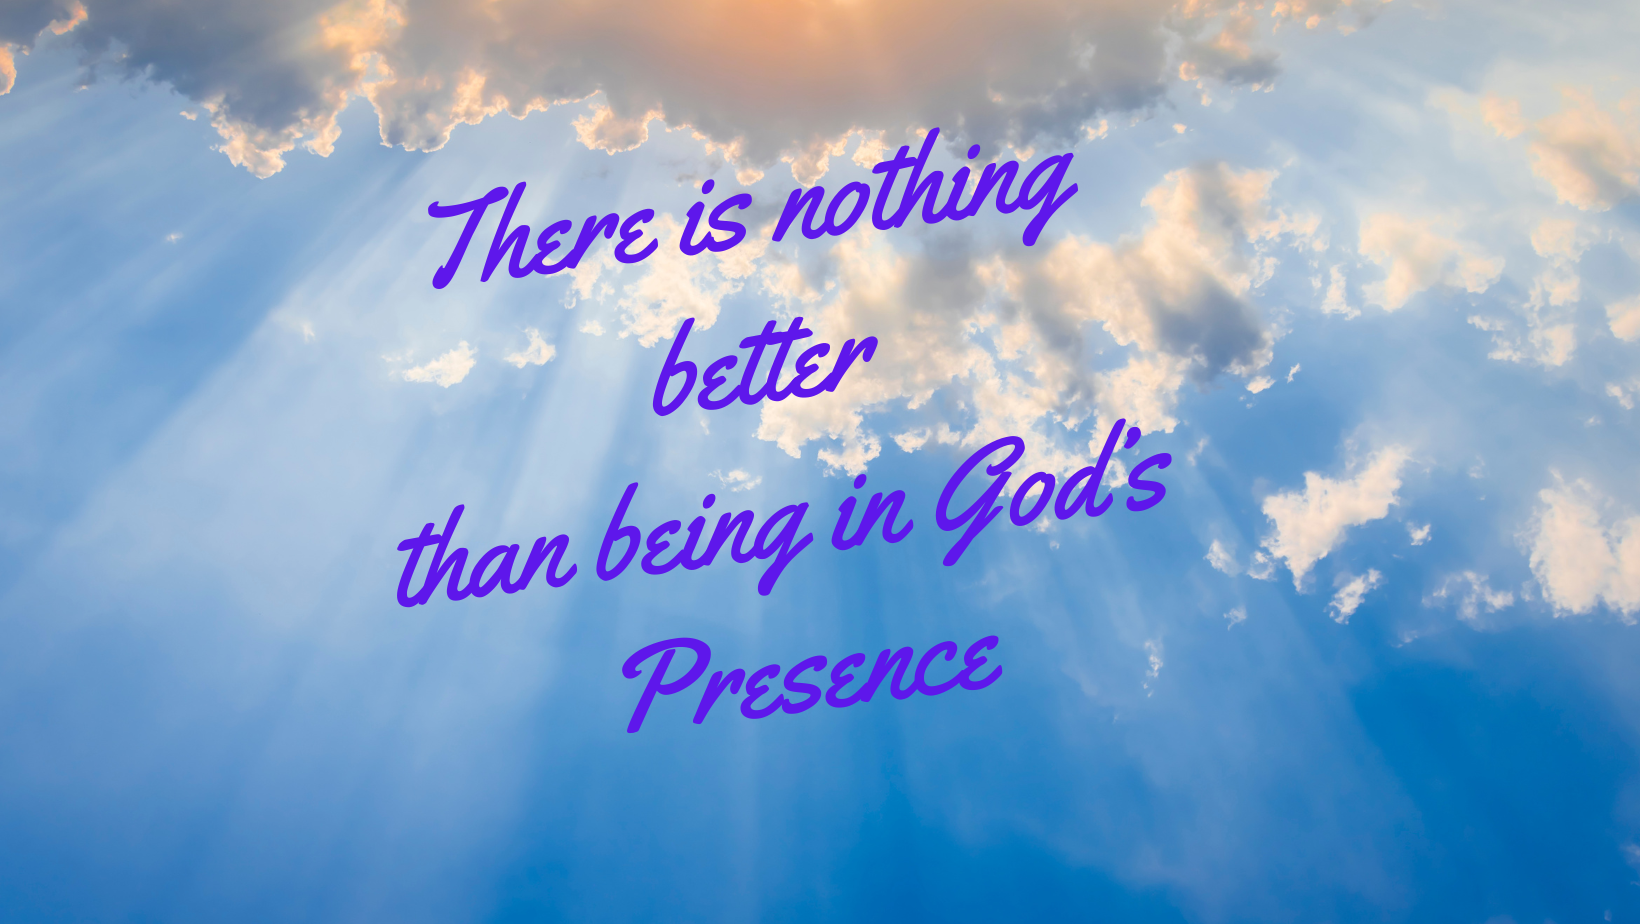 There is nothing better than being in God’s presence – Psalm 84